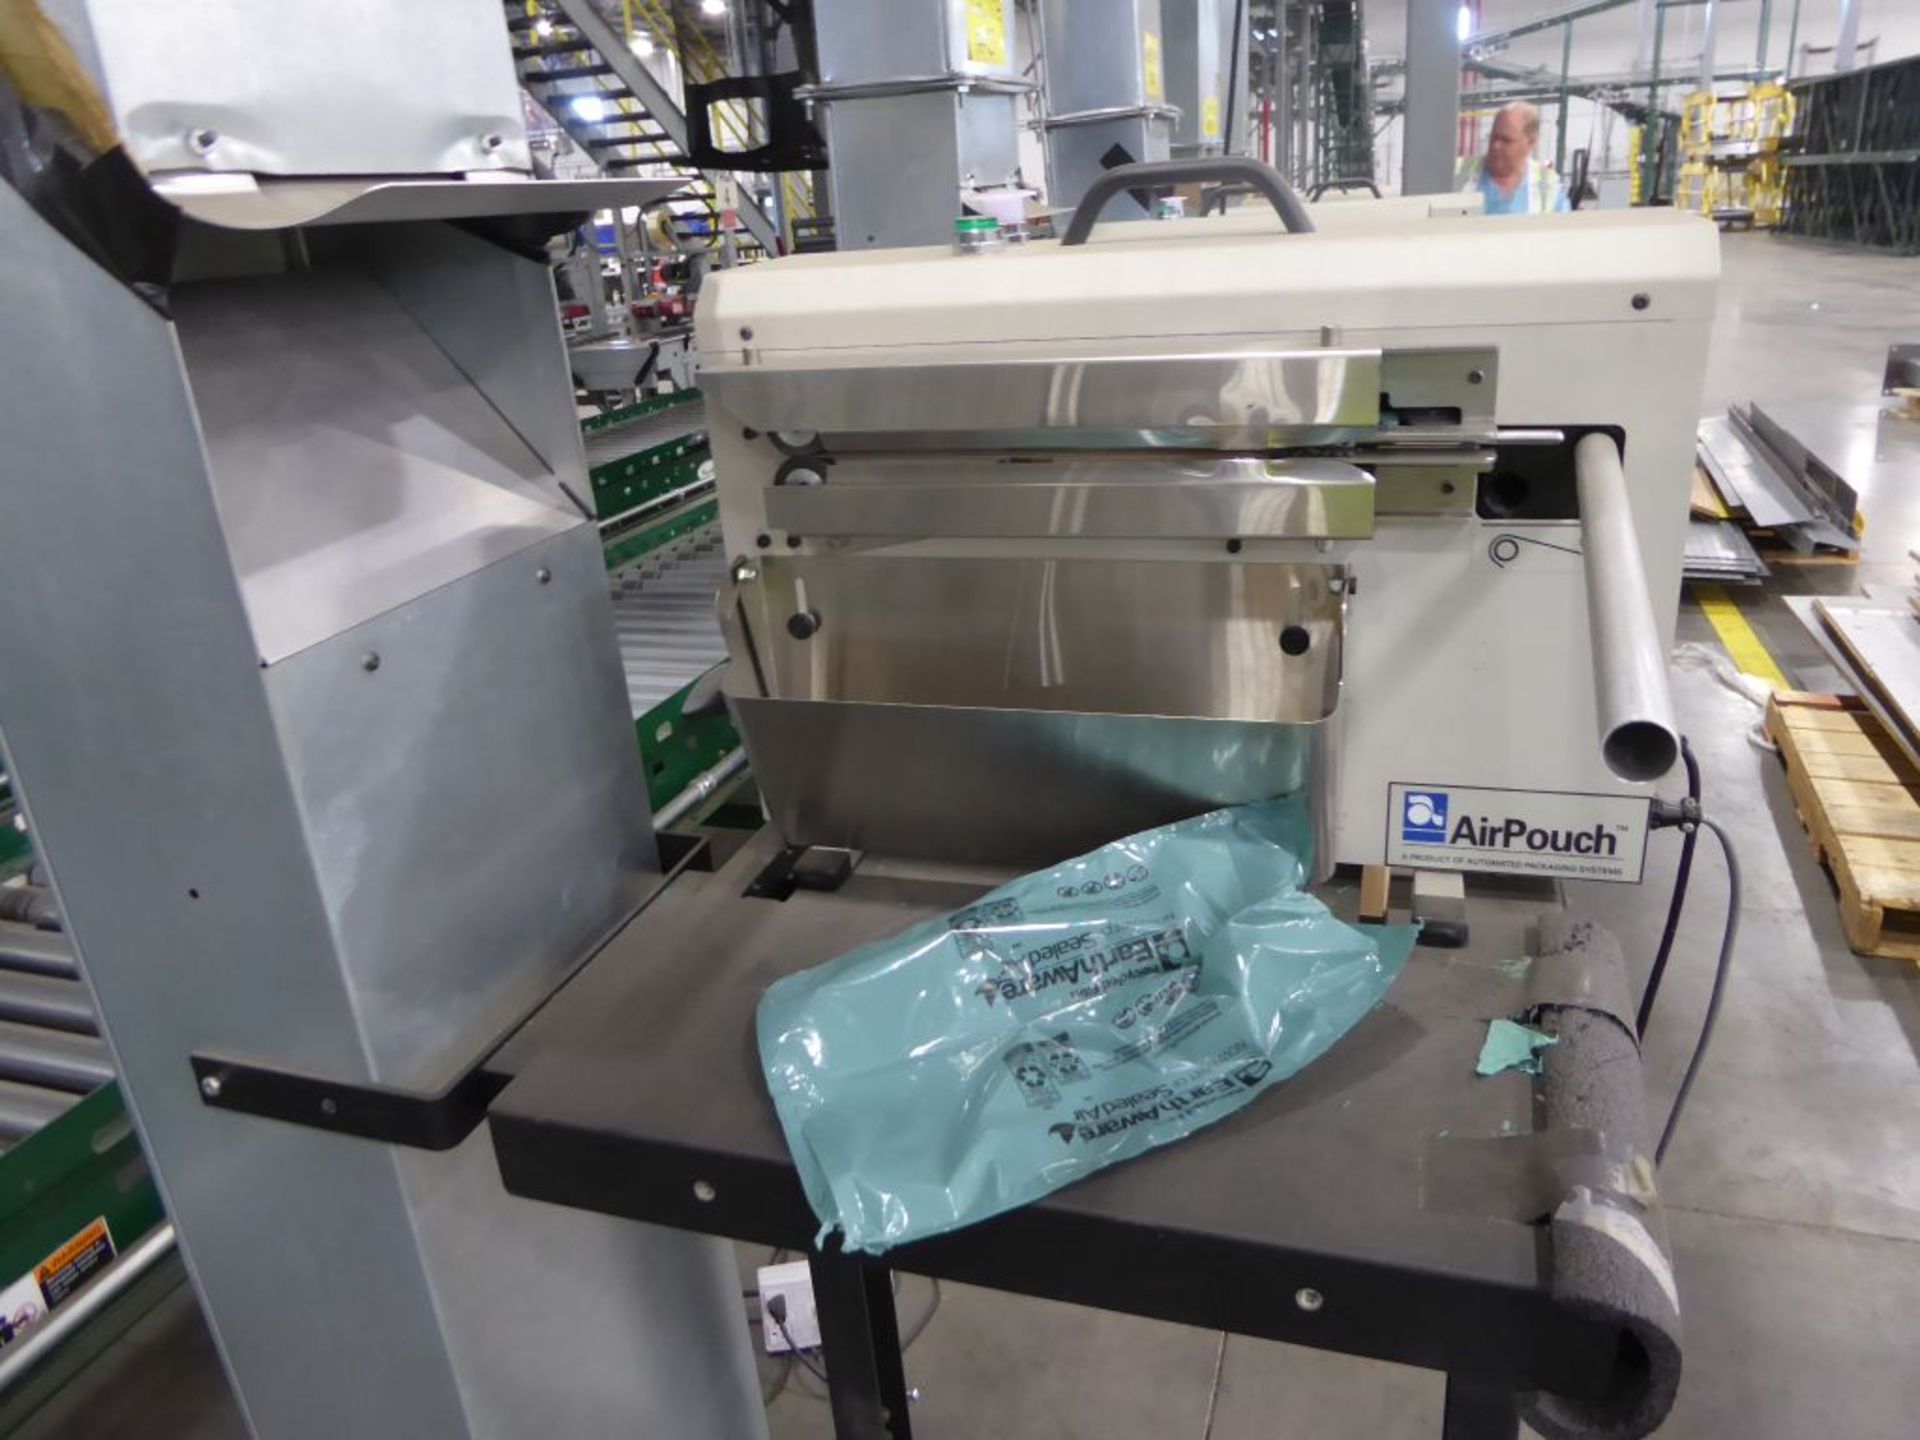 Air Pouch Express 3 Packaging System - Image 3 of 6